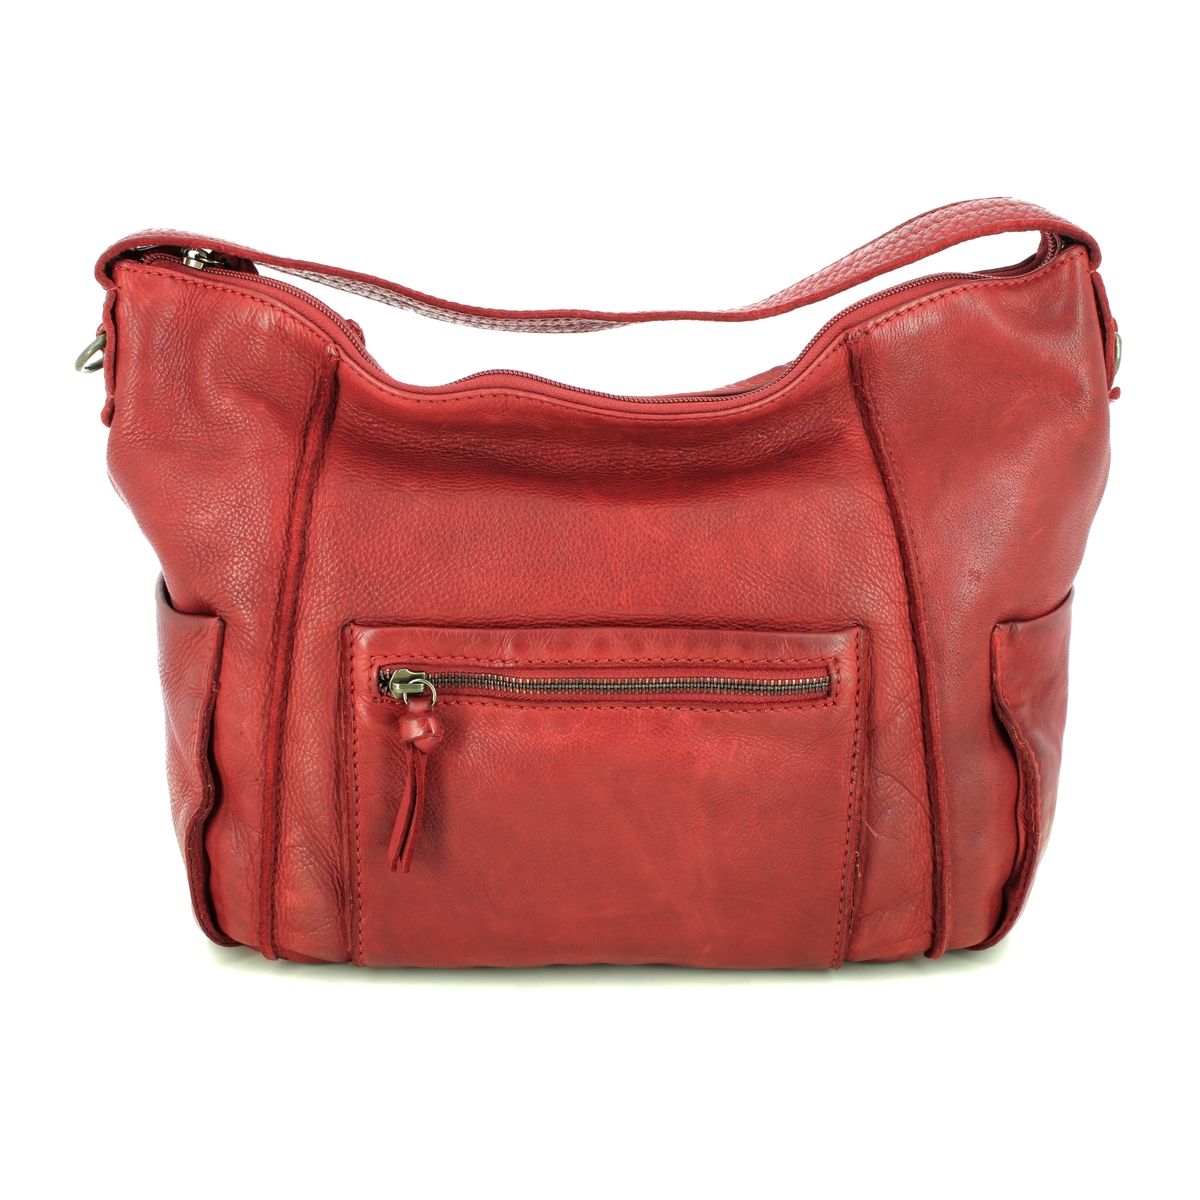 Gianni Conti Aosta Hobo Red Leather Womens Handbag 4294824-50 In Size 2 In Plain Red Leather